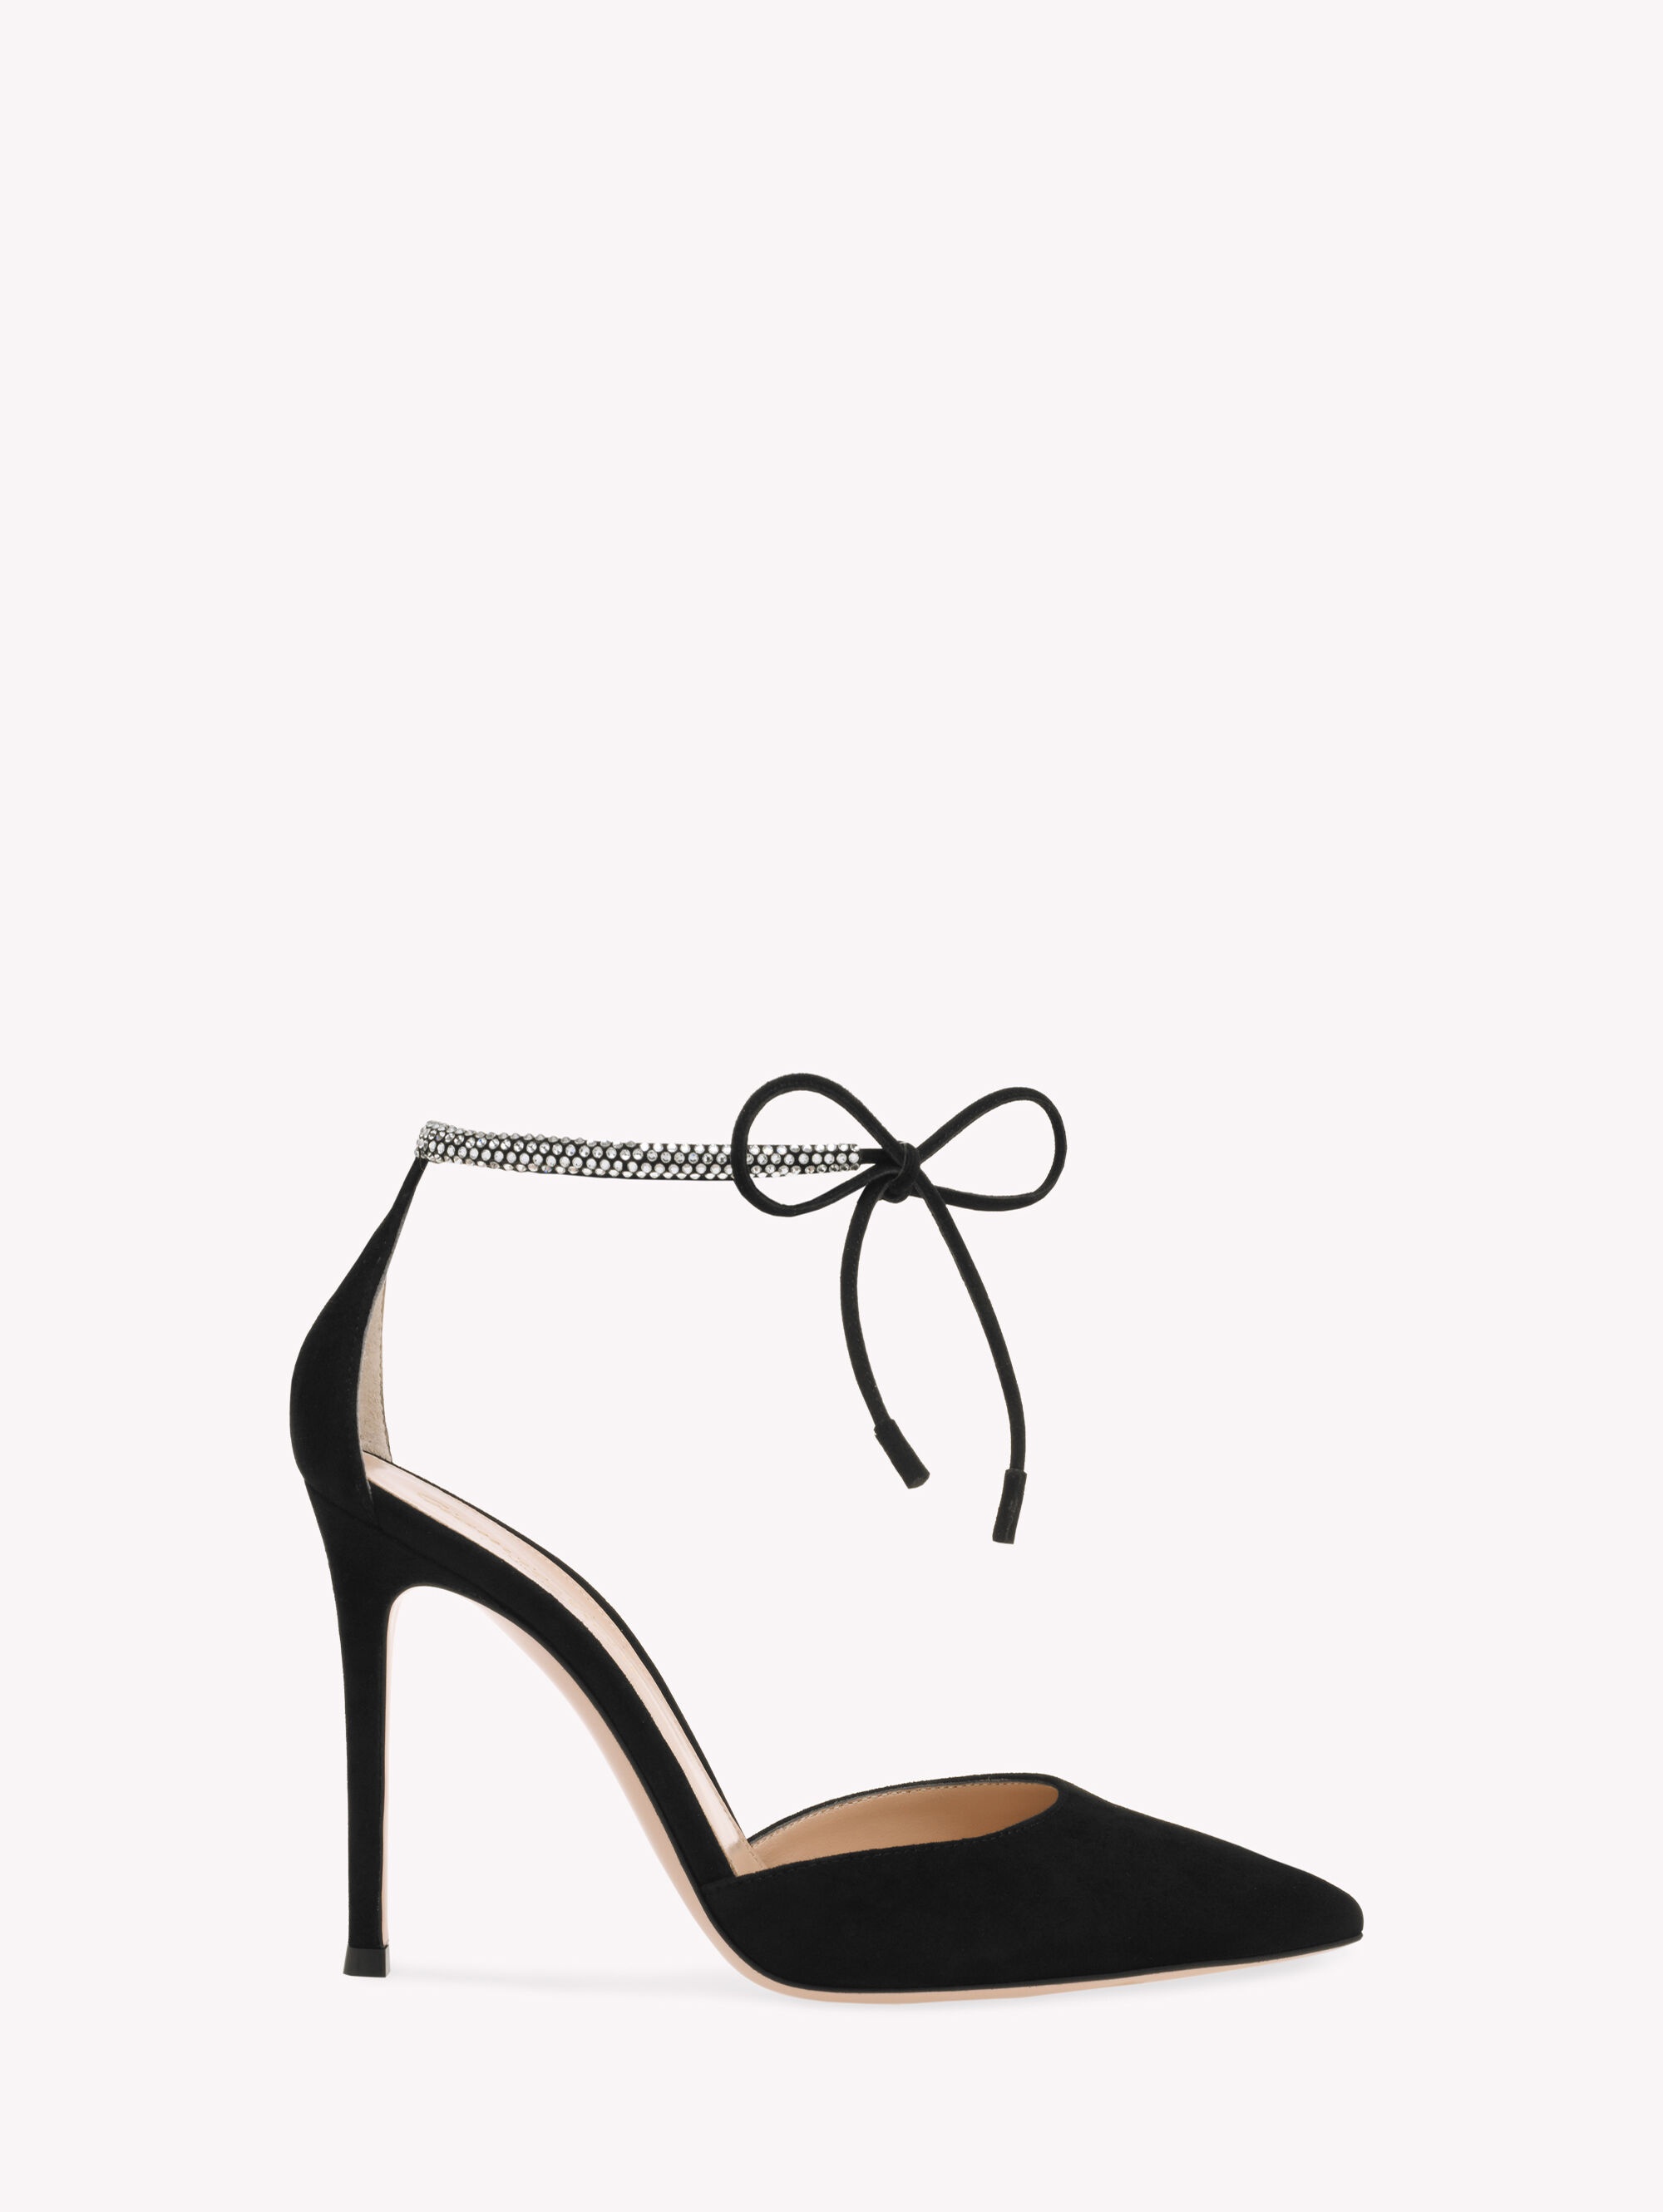 Gianvito Rossi Piper Anklet patent-leather pumps - Black